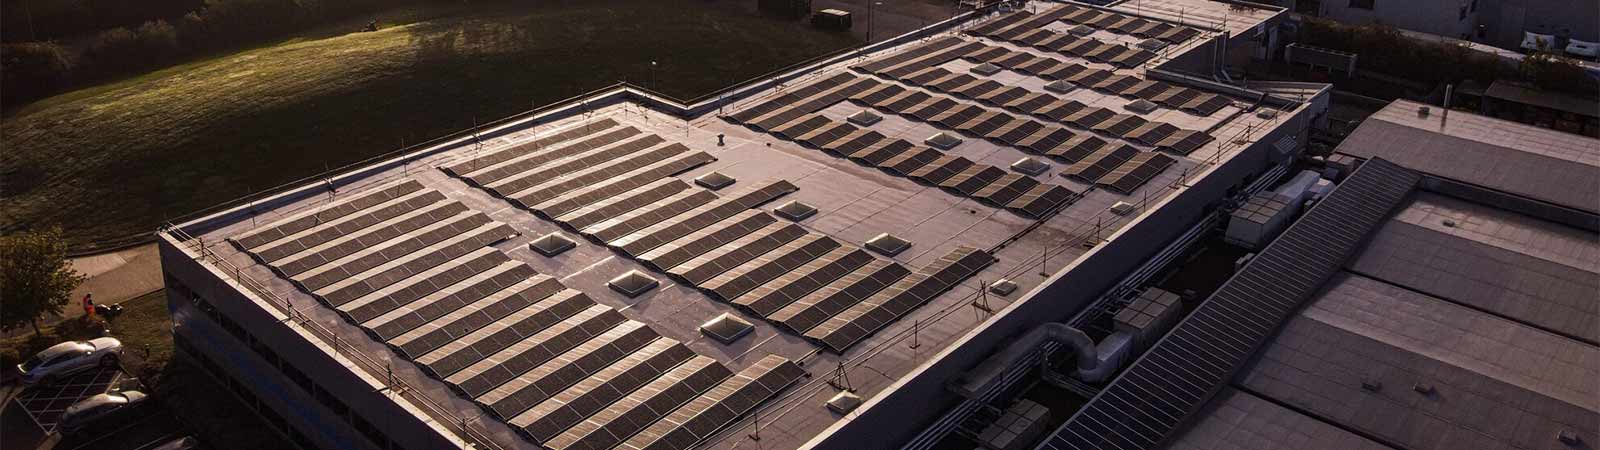 Image of the solar panel roof at Trumpf Laser